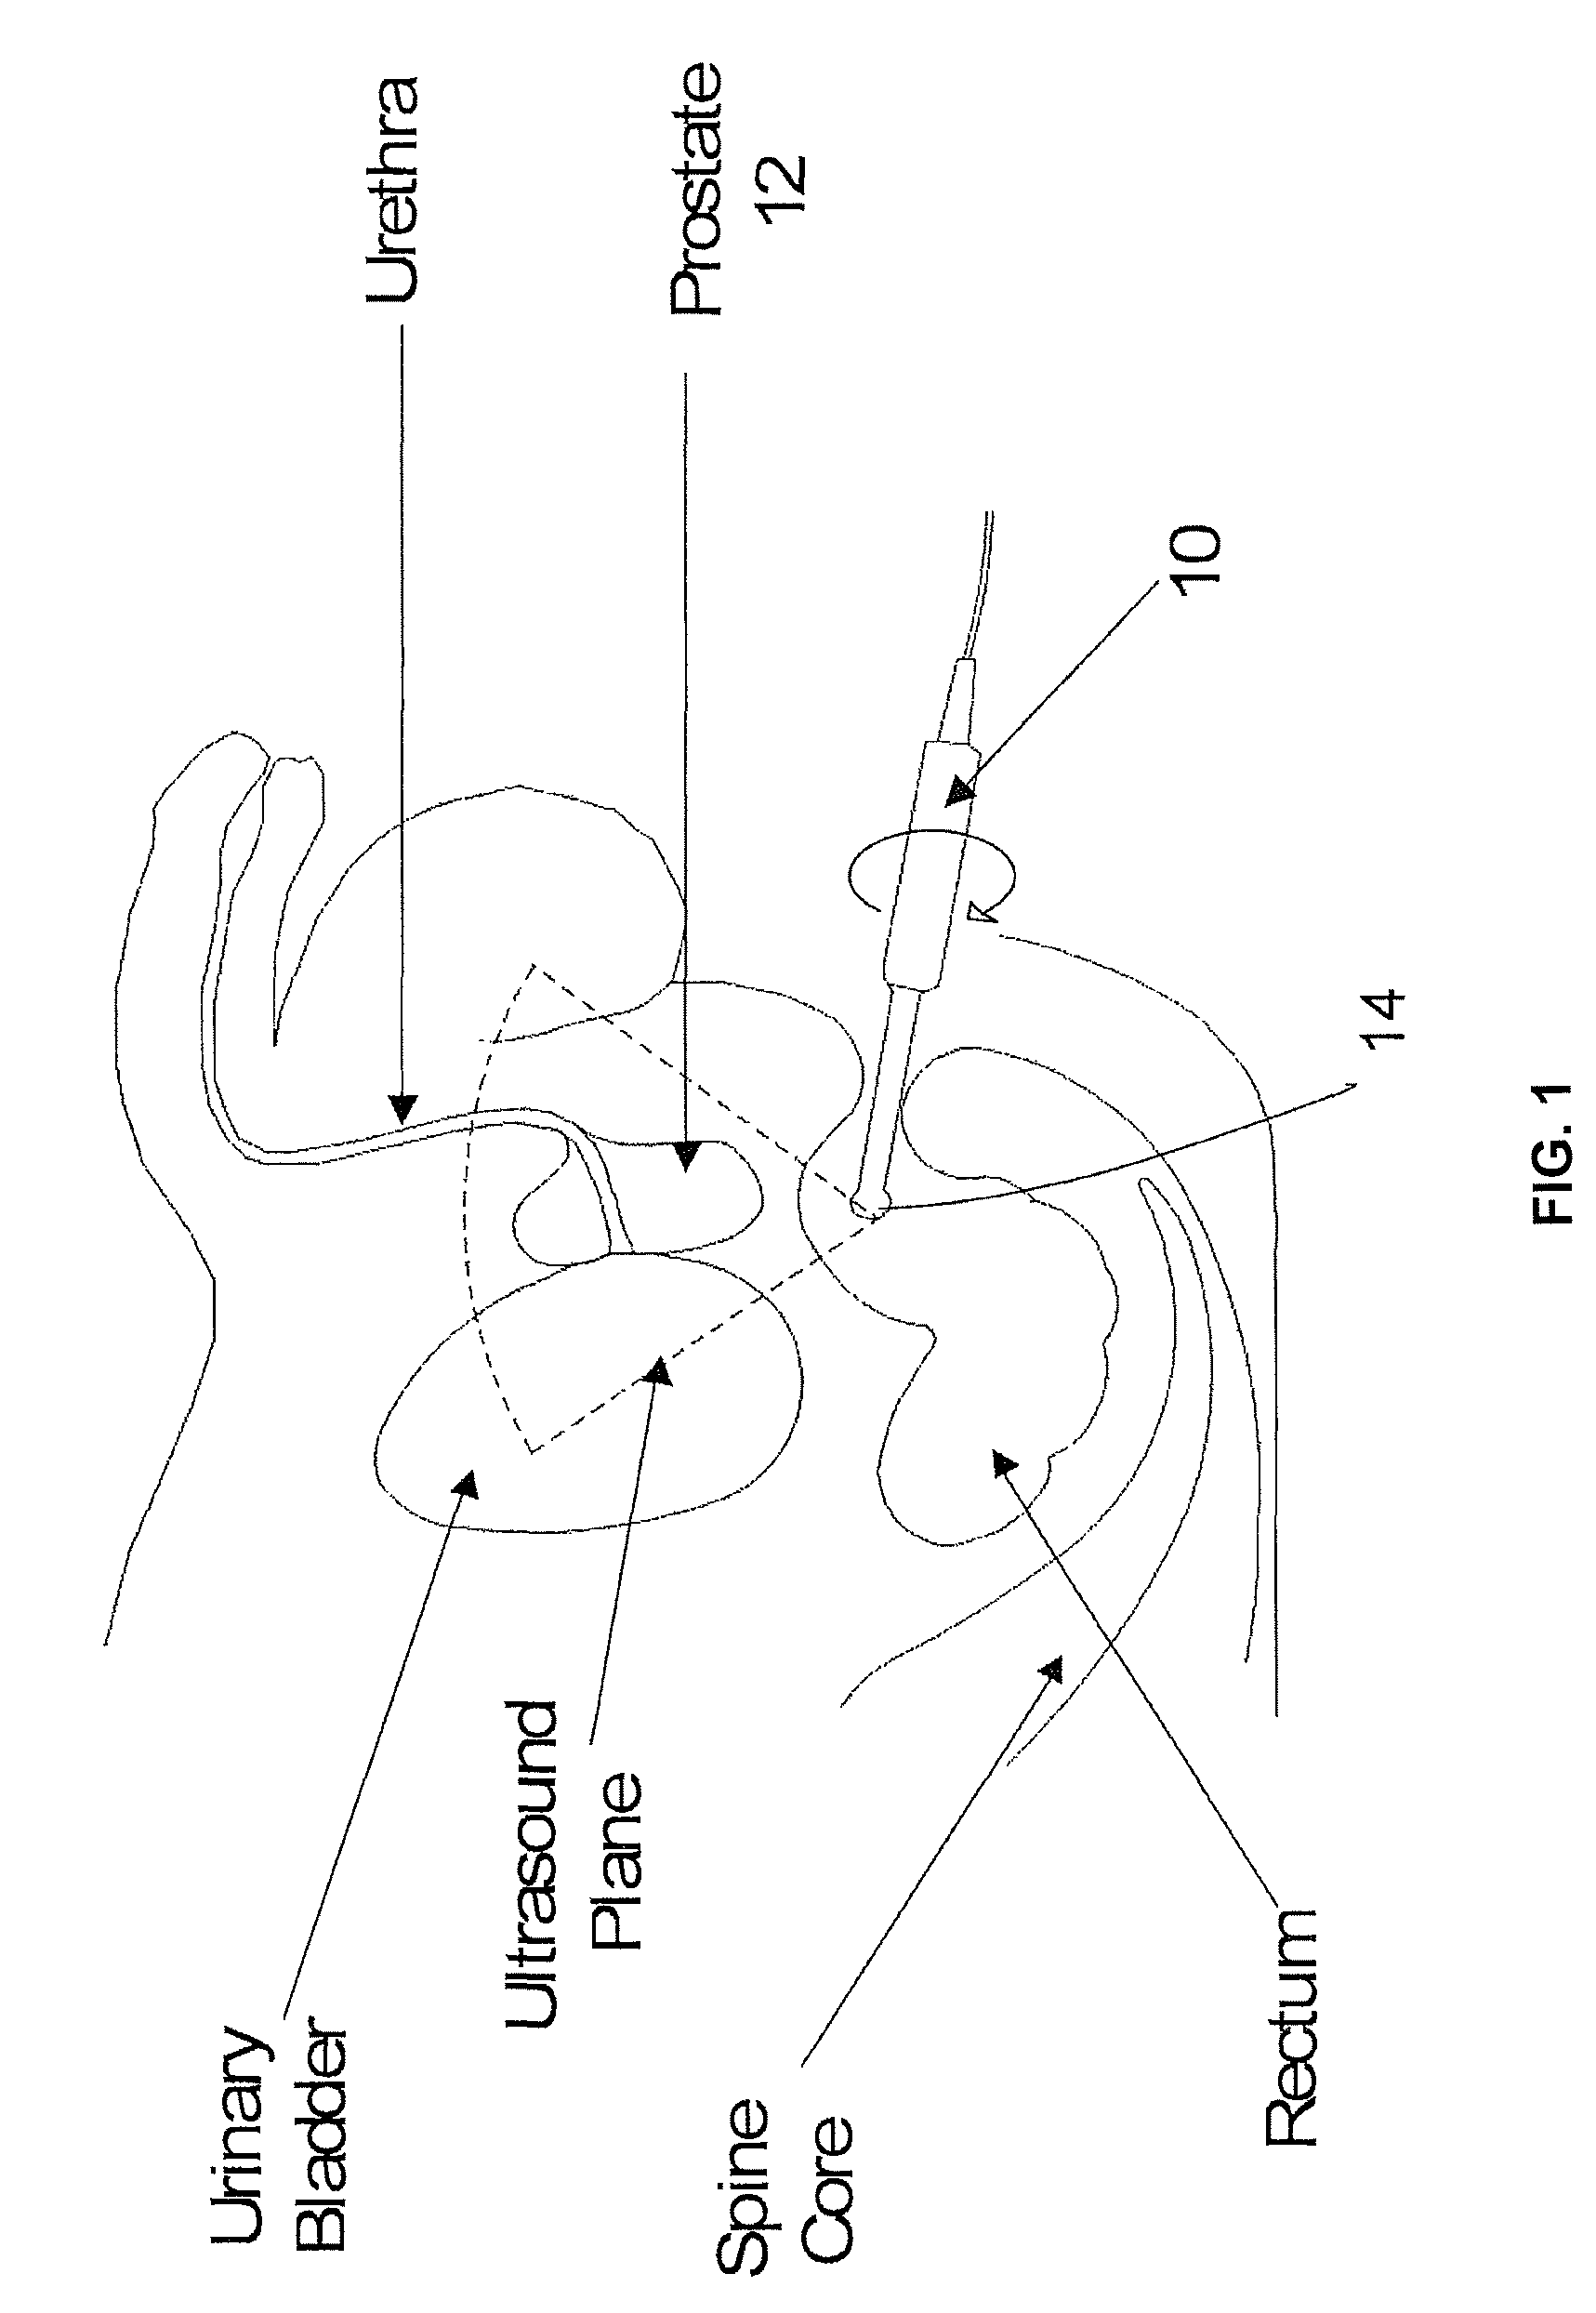 Universal ultrasound holder and rotation device